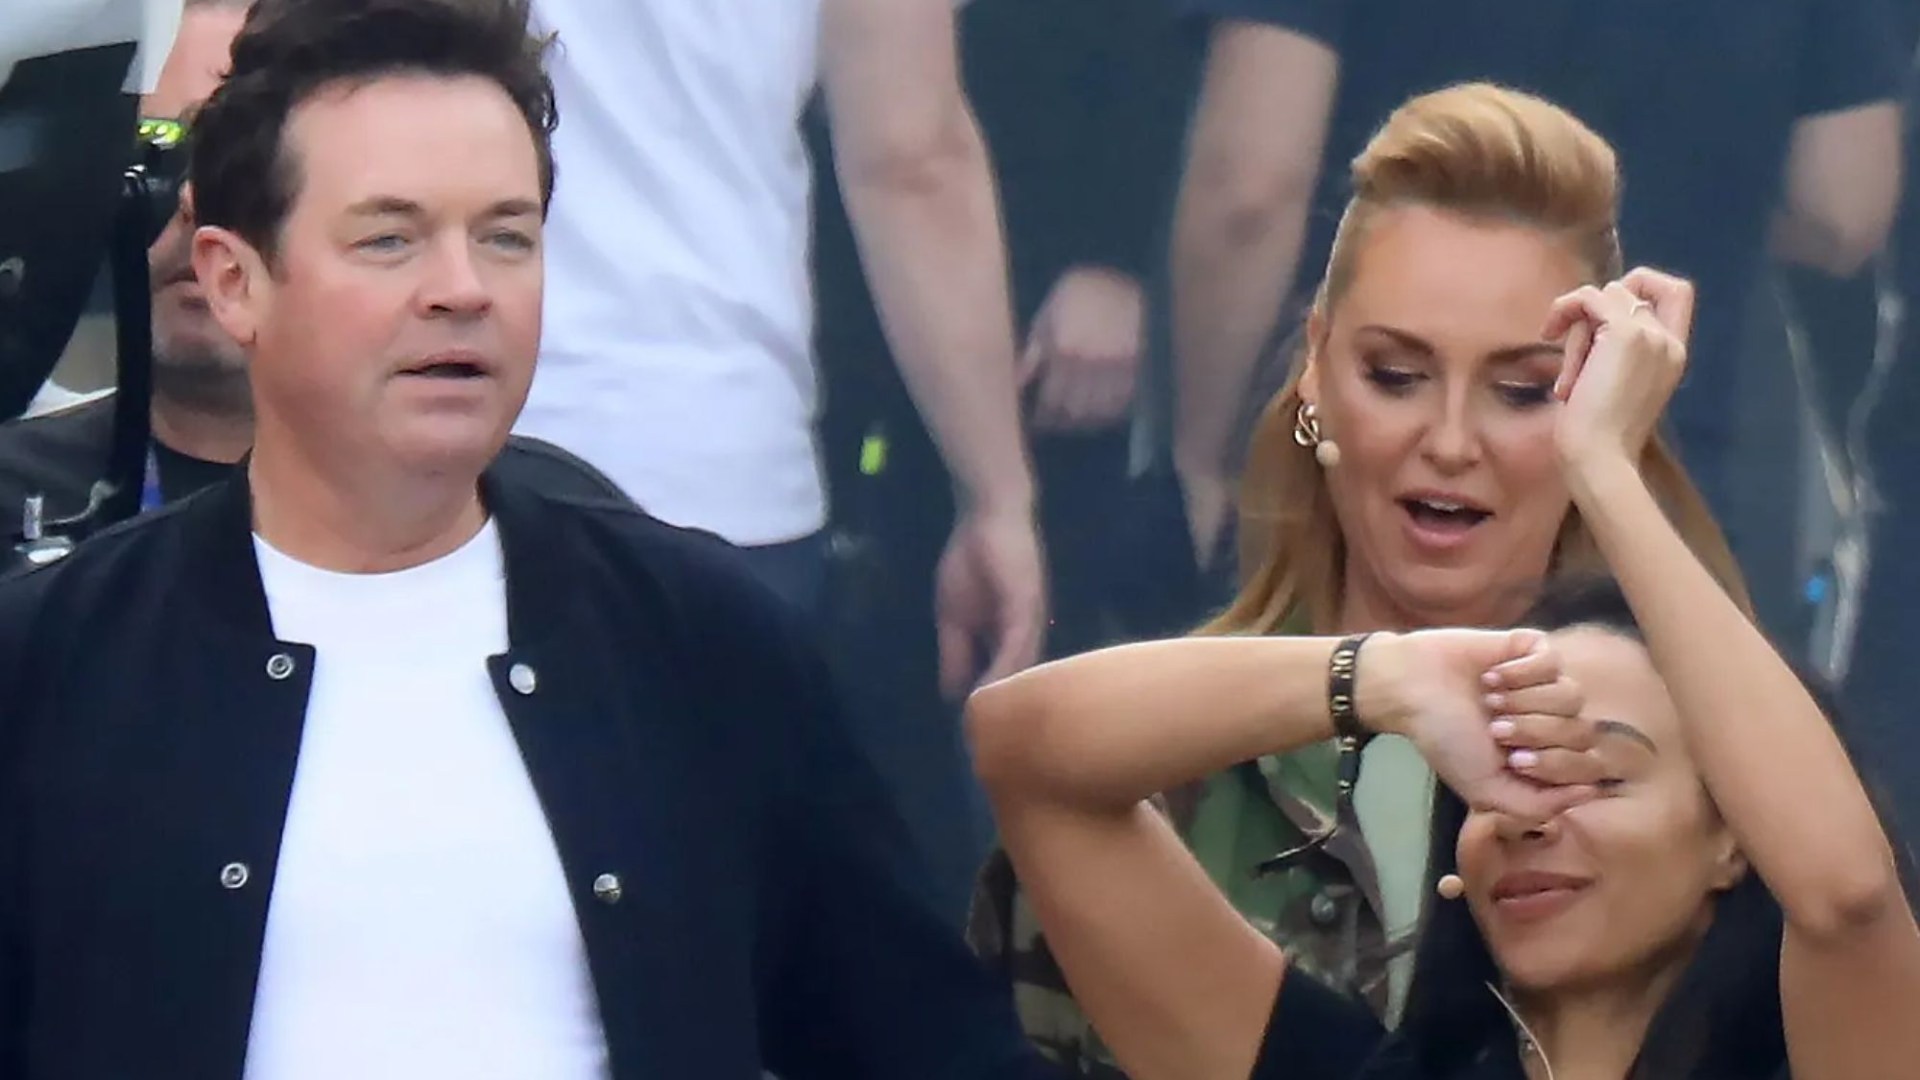 ‘I’m in love’ says Josie Gibson as she’s seen holding hands with Stephen Mulhern backstage at Saturday Night Takeaway